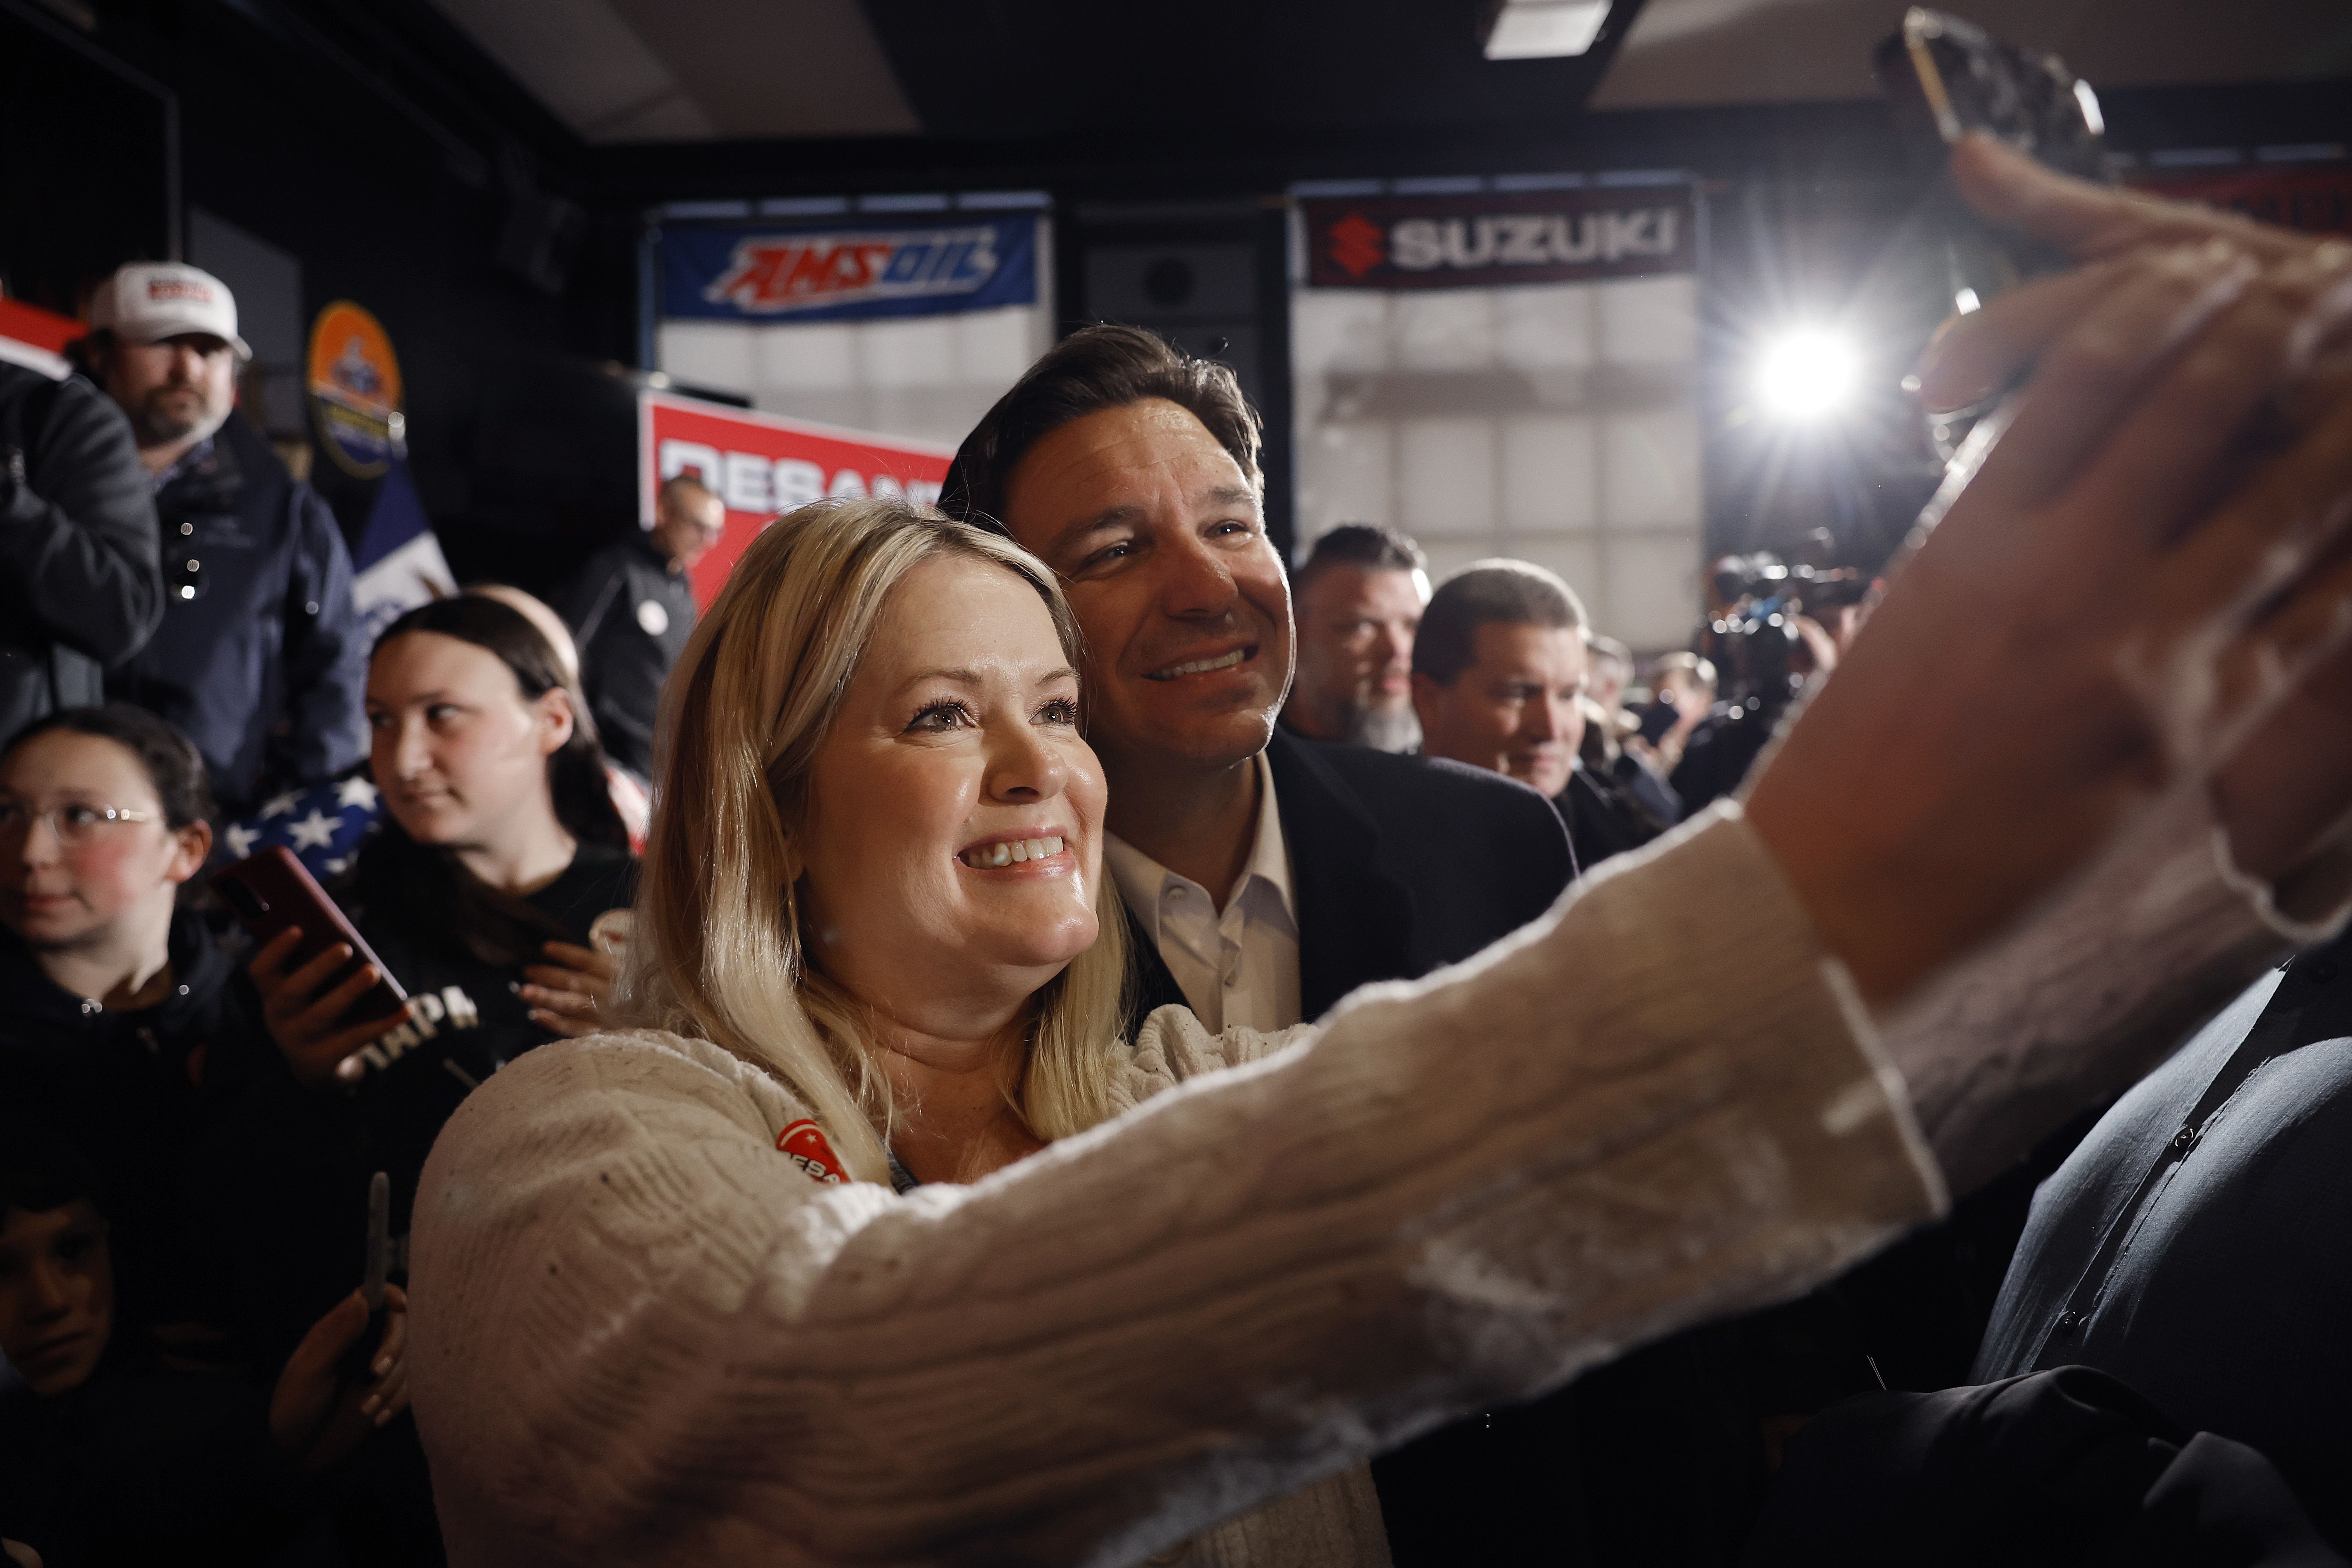  Republican presidential candidate Florida Gov. Ron DeSantis poses for photographs with people during a campaign event at the Chrome Horse Saloon one day before the Iowa caucuses on January 14, 2024 in Cedar Rapids, Iowa. DeSantis and fellow Republican presidential candidates have been adjusting their campaign schedules to deal with blizzard-like conditions in Iowa a day before the caucuses, the first primary competition of the 2024 election year. 